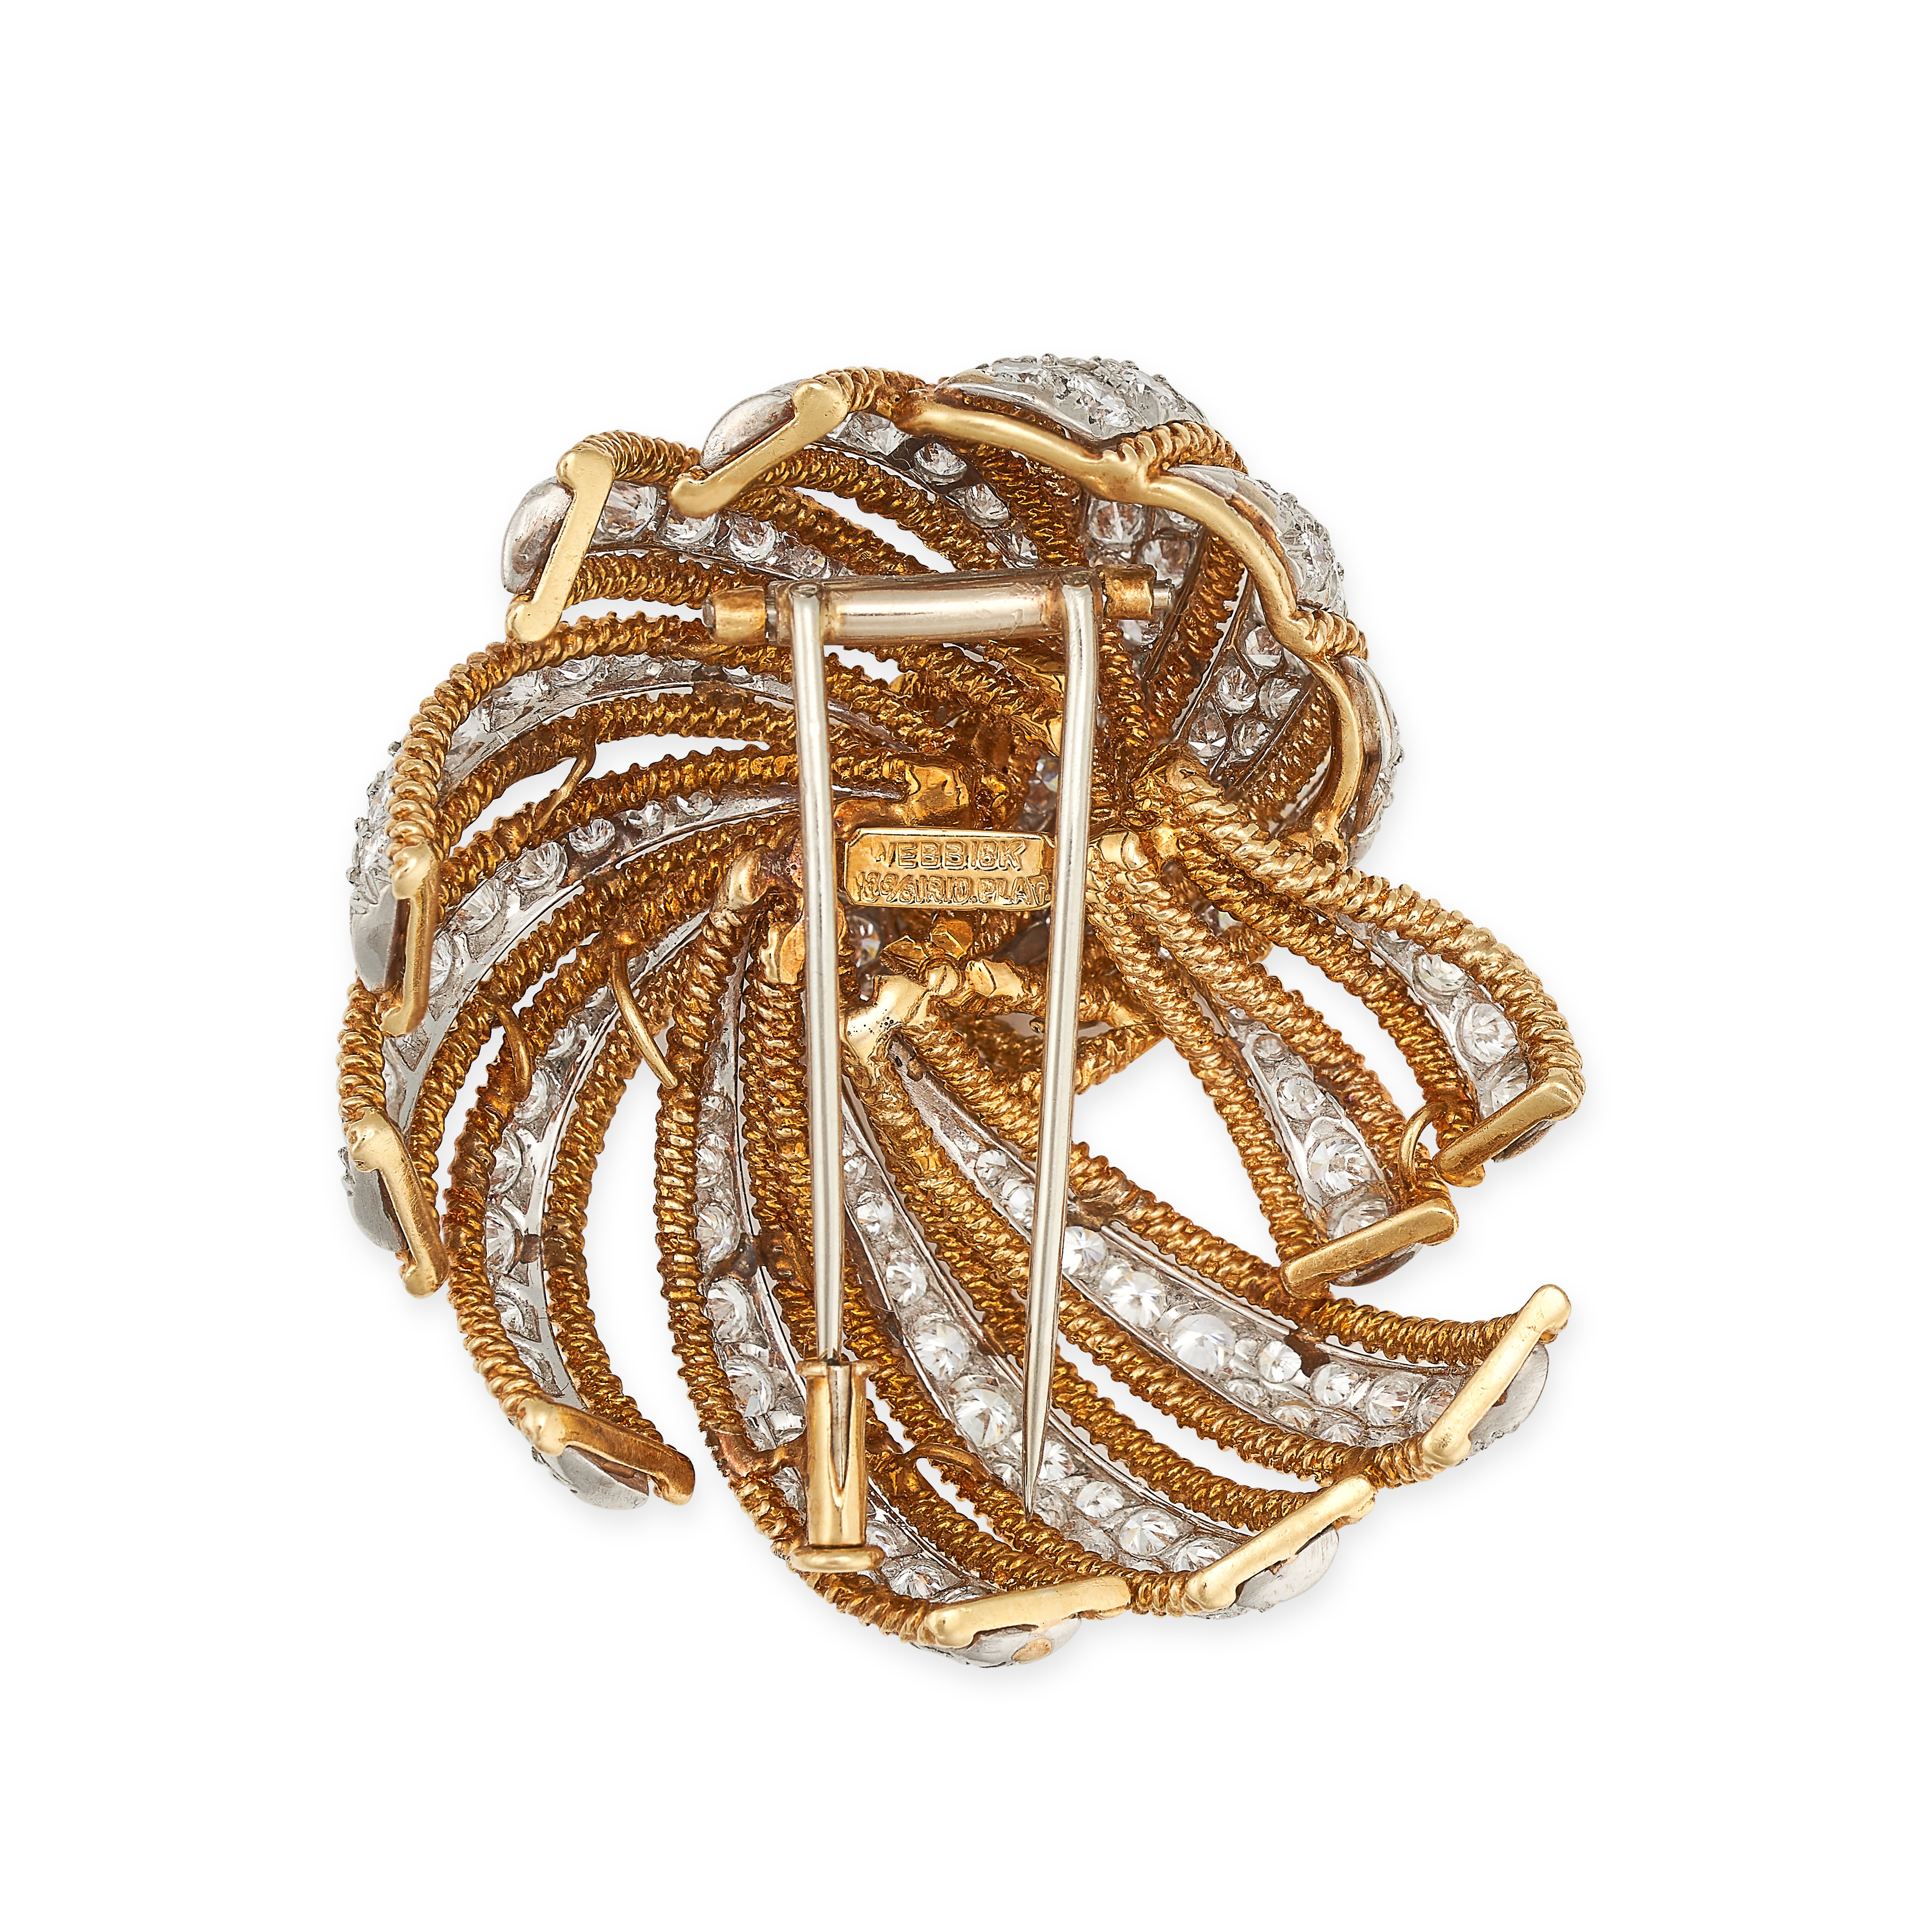 DAVID WEBB, A VINTAGE DIAMOND BROOCH in yellow gold and platinum, the scrolling body set with rows - Image 2 of 2